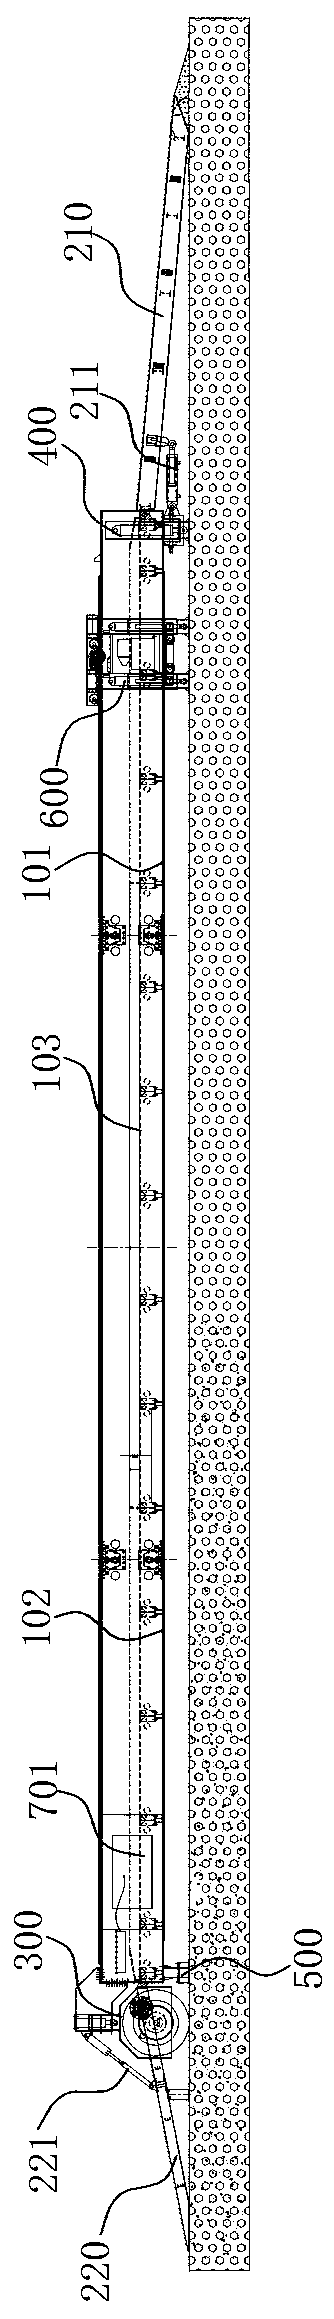 Large-span all-hydraulic tire walking tunnel inverted arch trestle and construction method